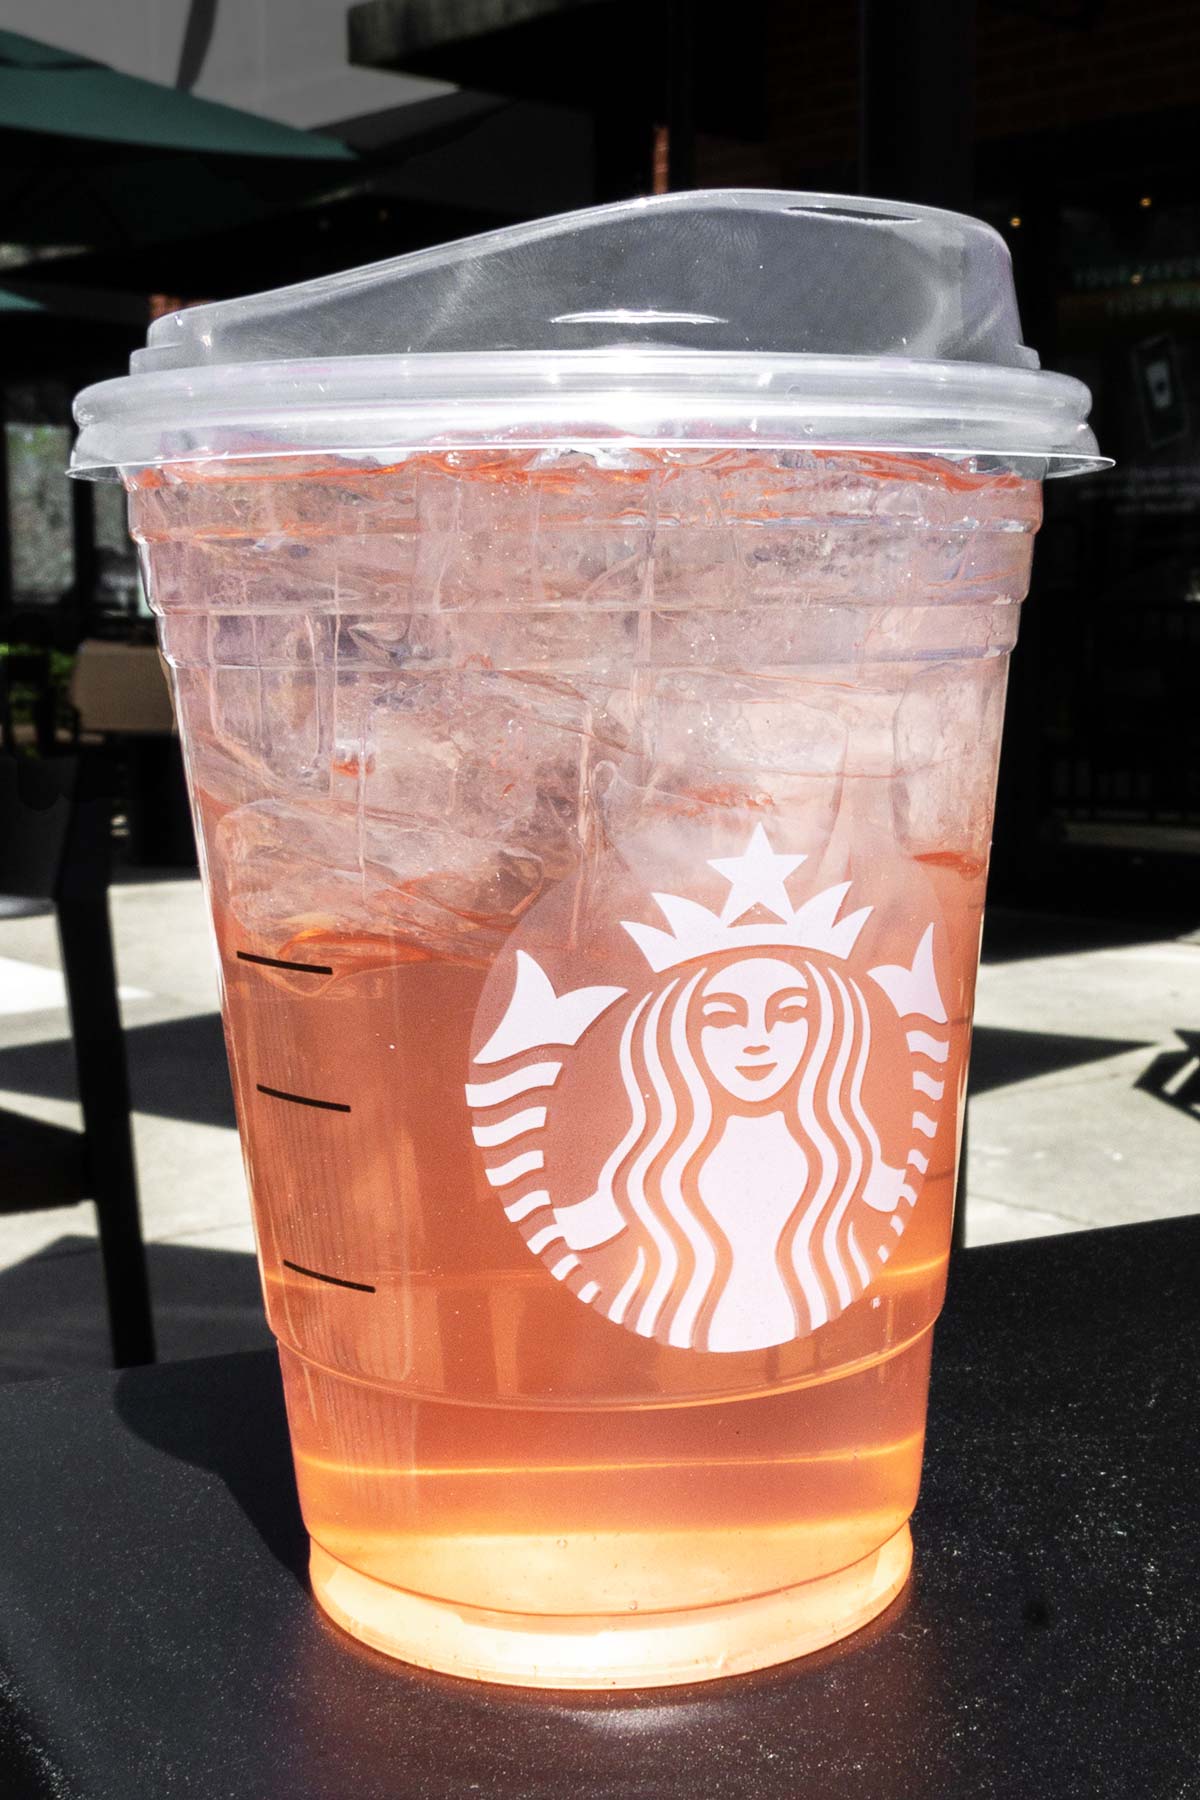 Starbucks secret menu TikTok Rose Gold Refresher drink from the side view of the cup with Starbucks logo and lid on.